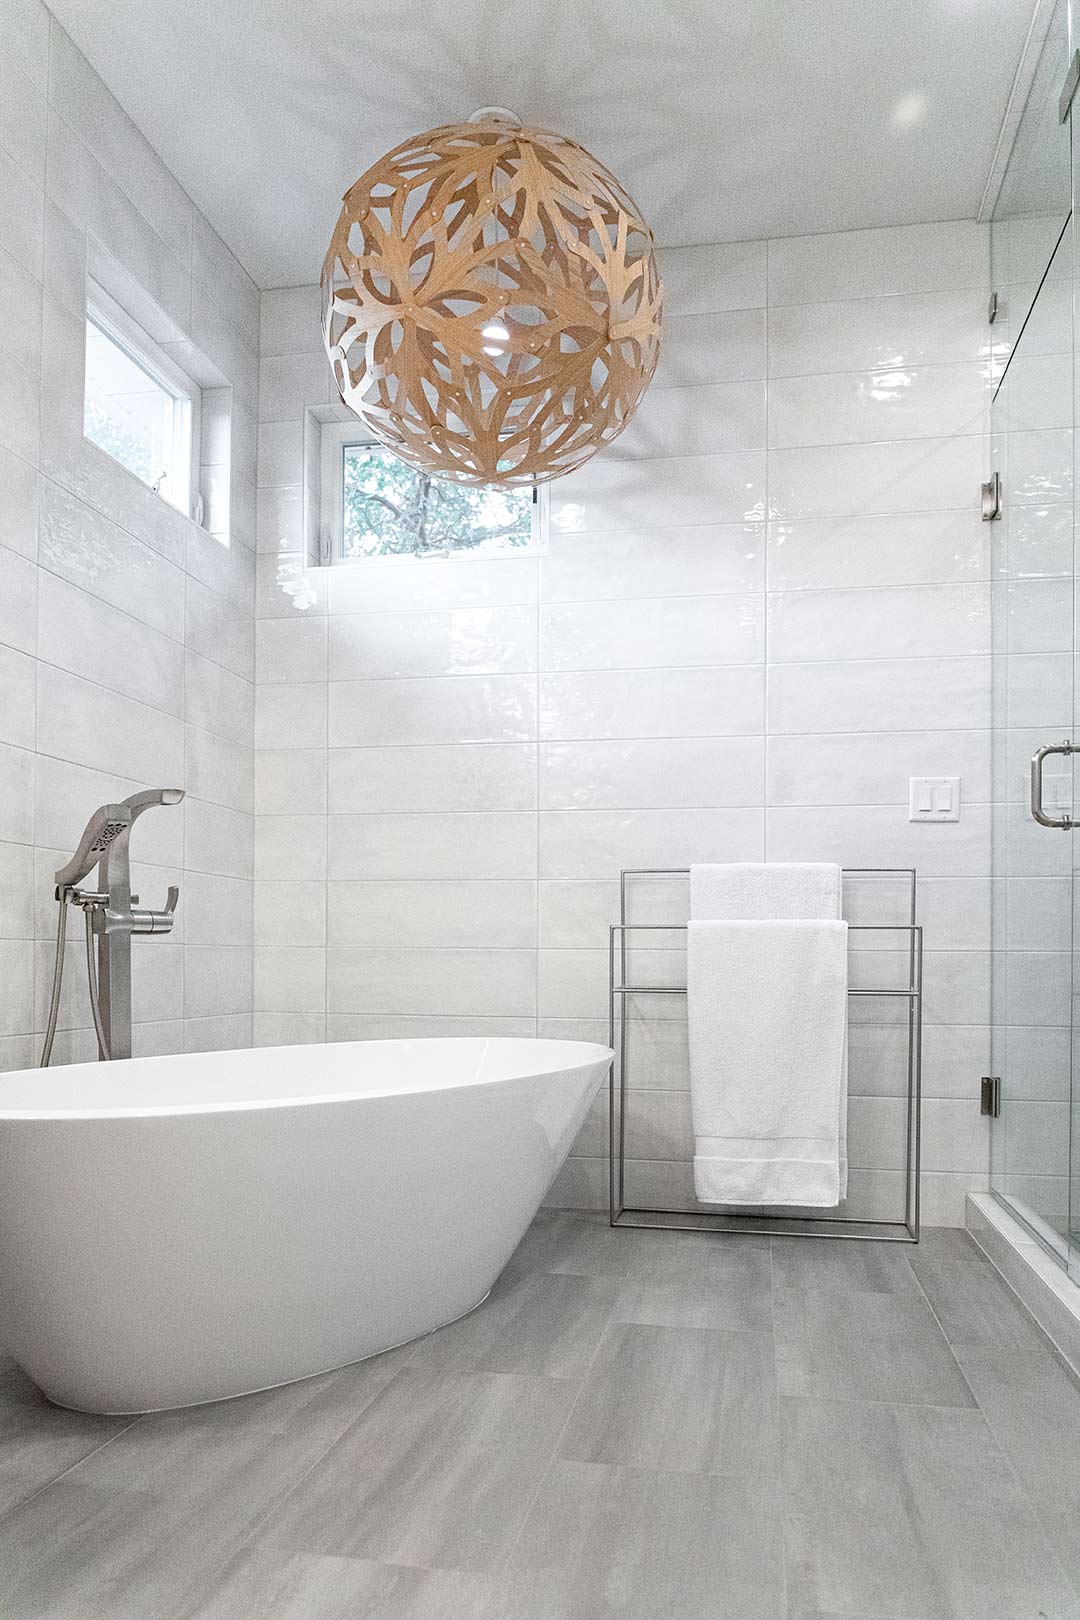 View of the freestanding tub with a modern chandelier-like globe light fixture overhead